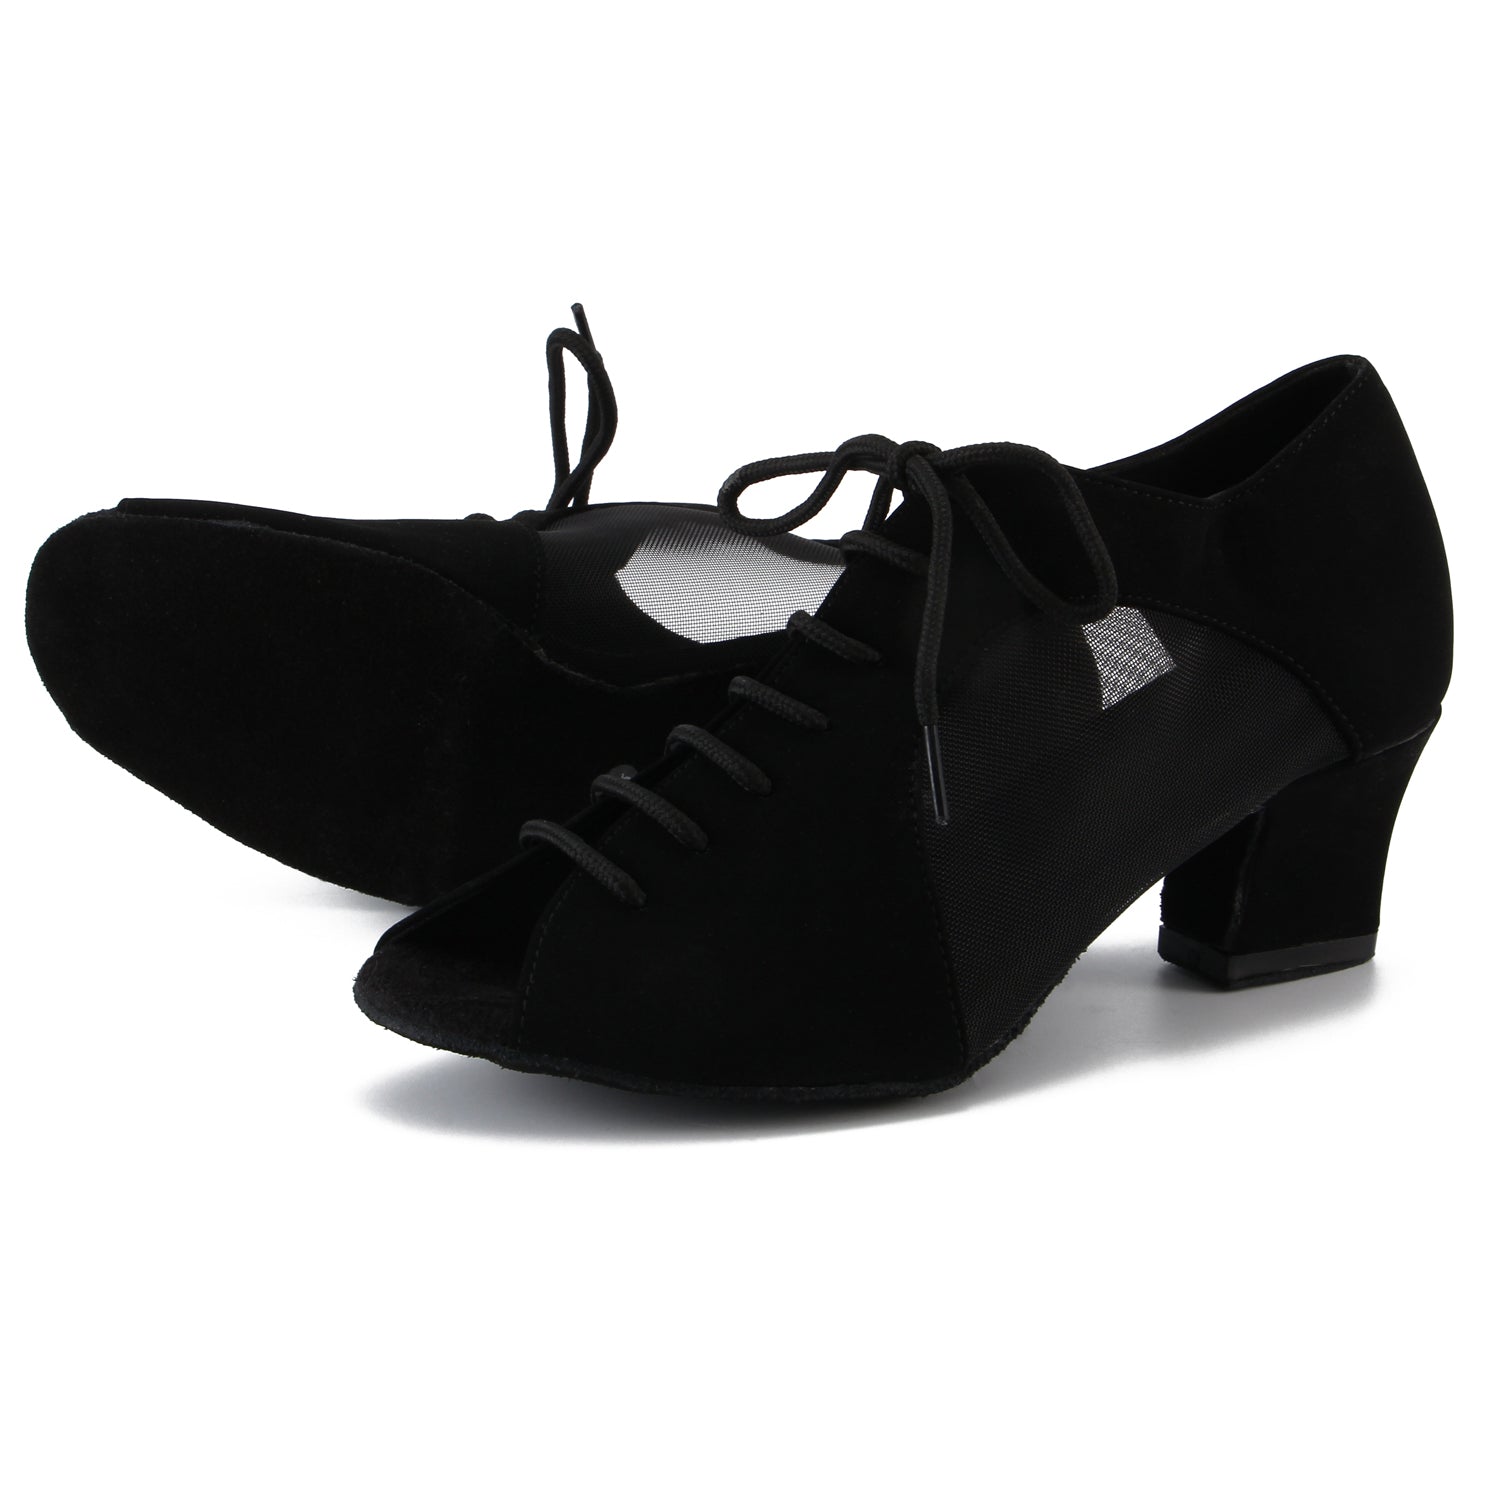 Women Ballroom Dancing Shoes with Suede Sole, Lace-up Open-toe Design in Black for Tango Latin Practice (PD-3003A)3